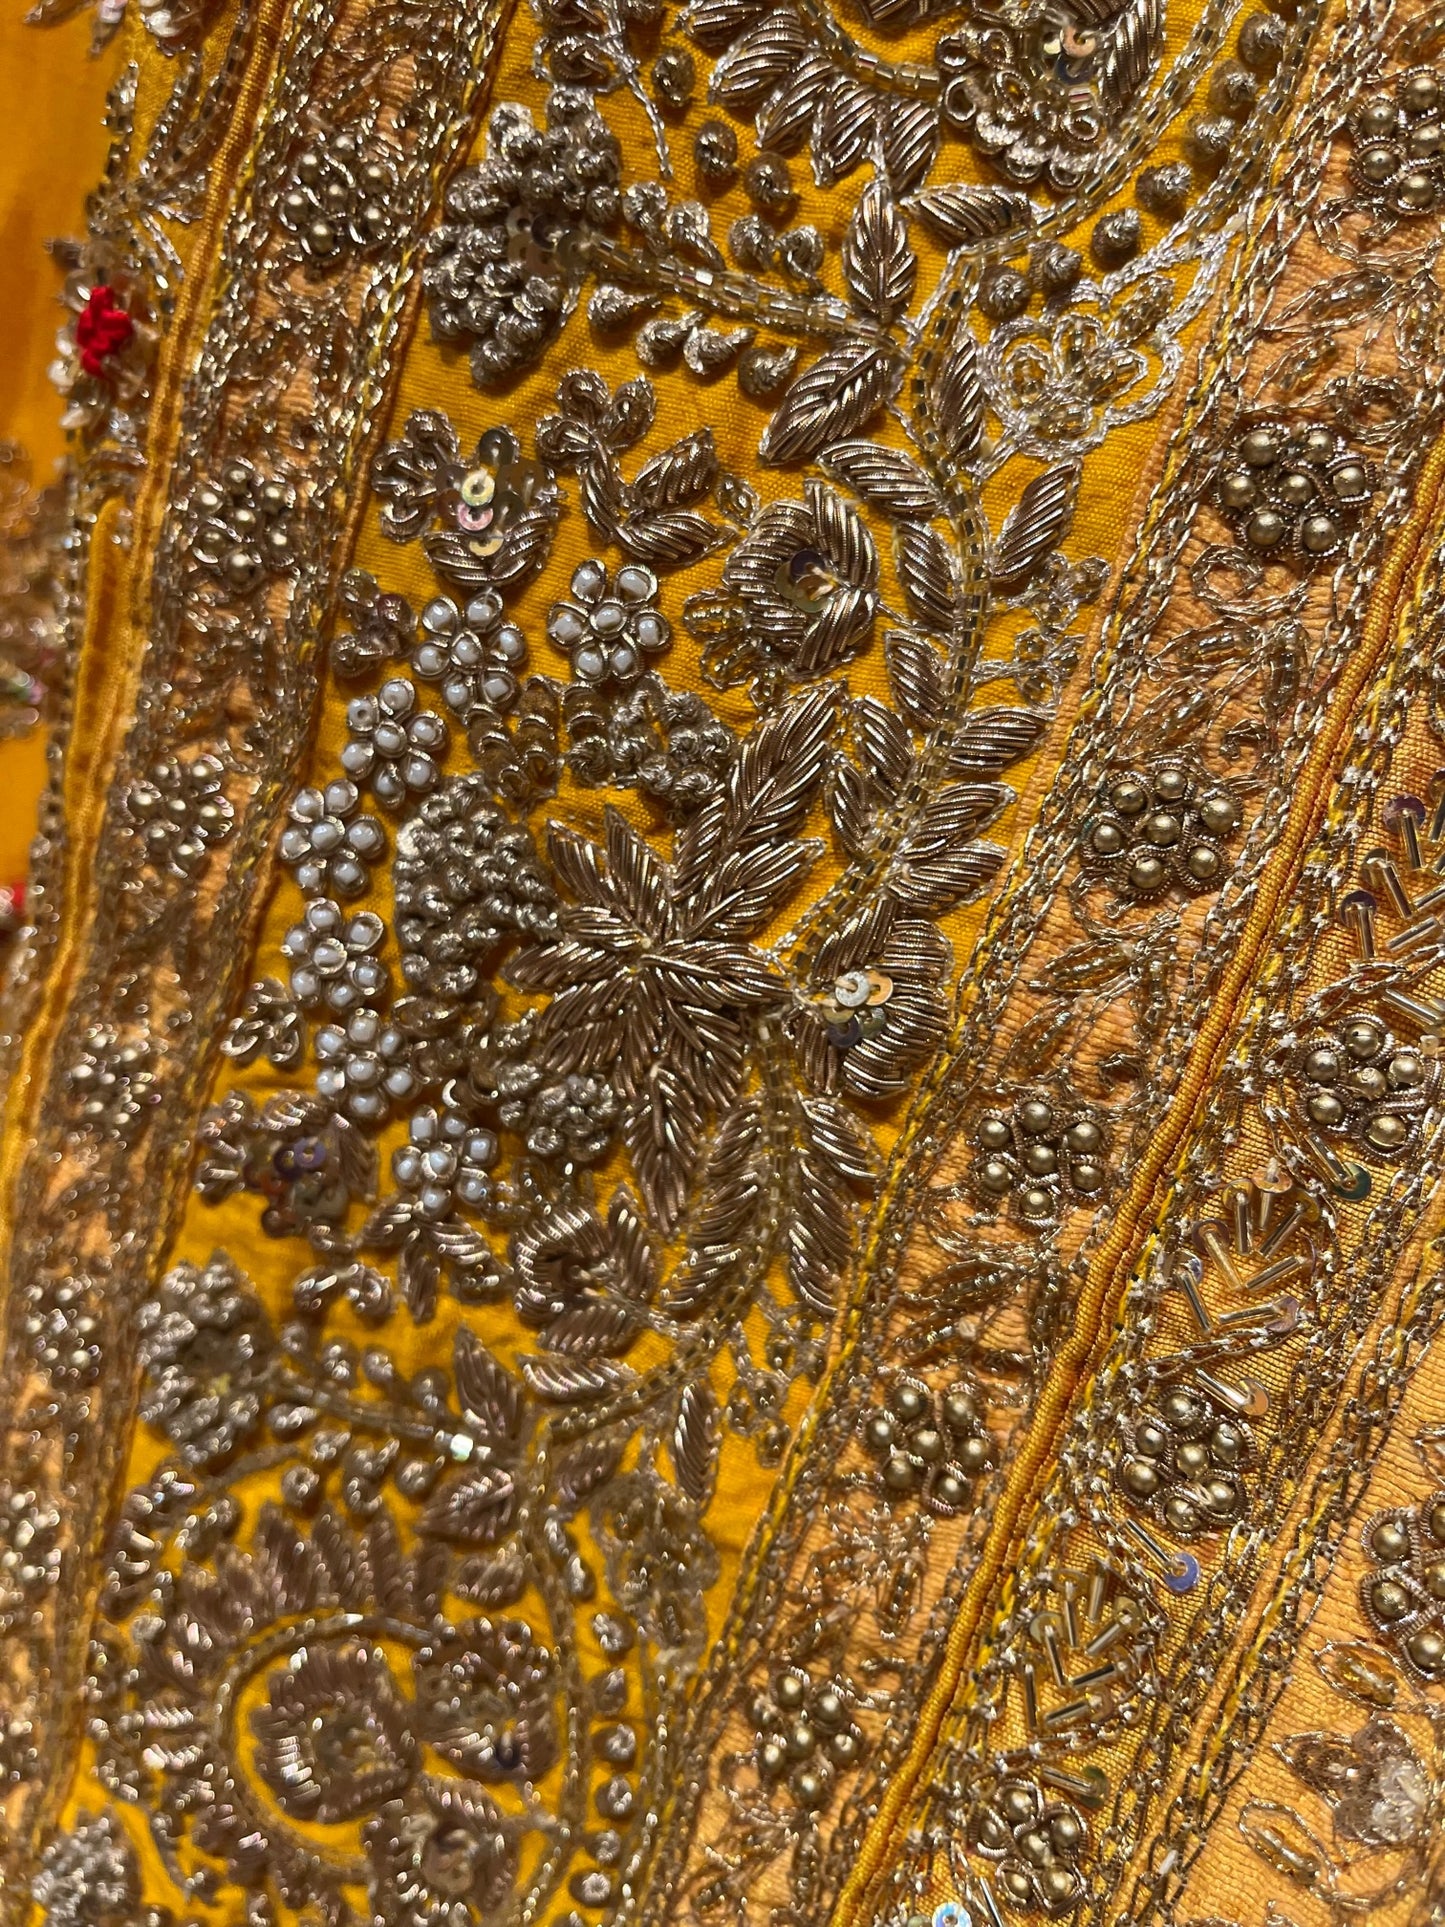 MUSTARD COLOUR CHINON HAND EMBROIDERED SAREE EMBELLISHED WITH ZARDOZI WORK